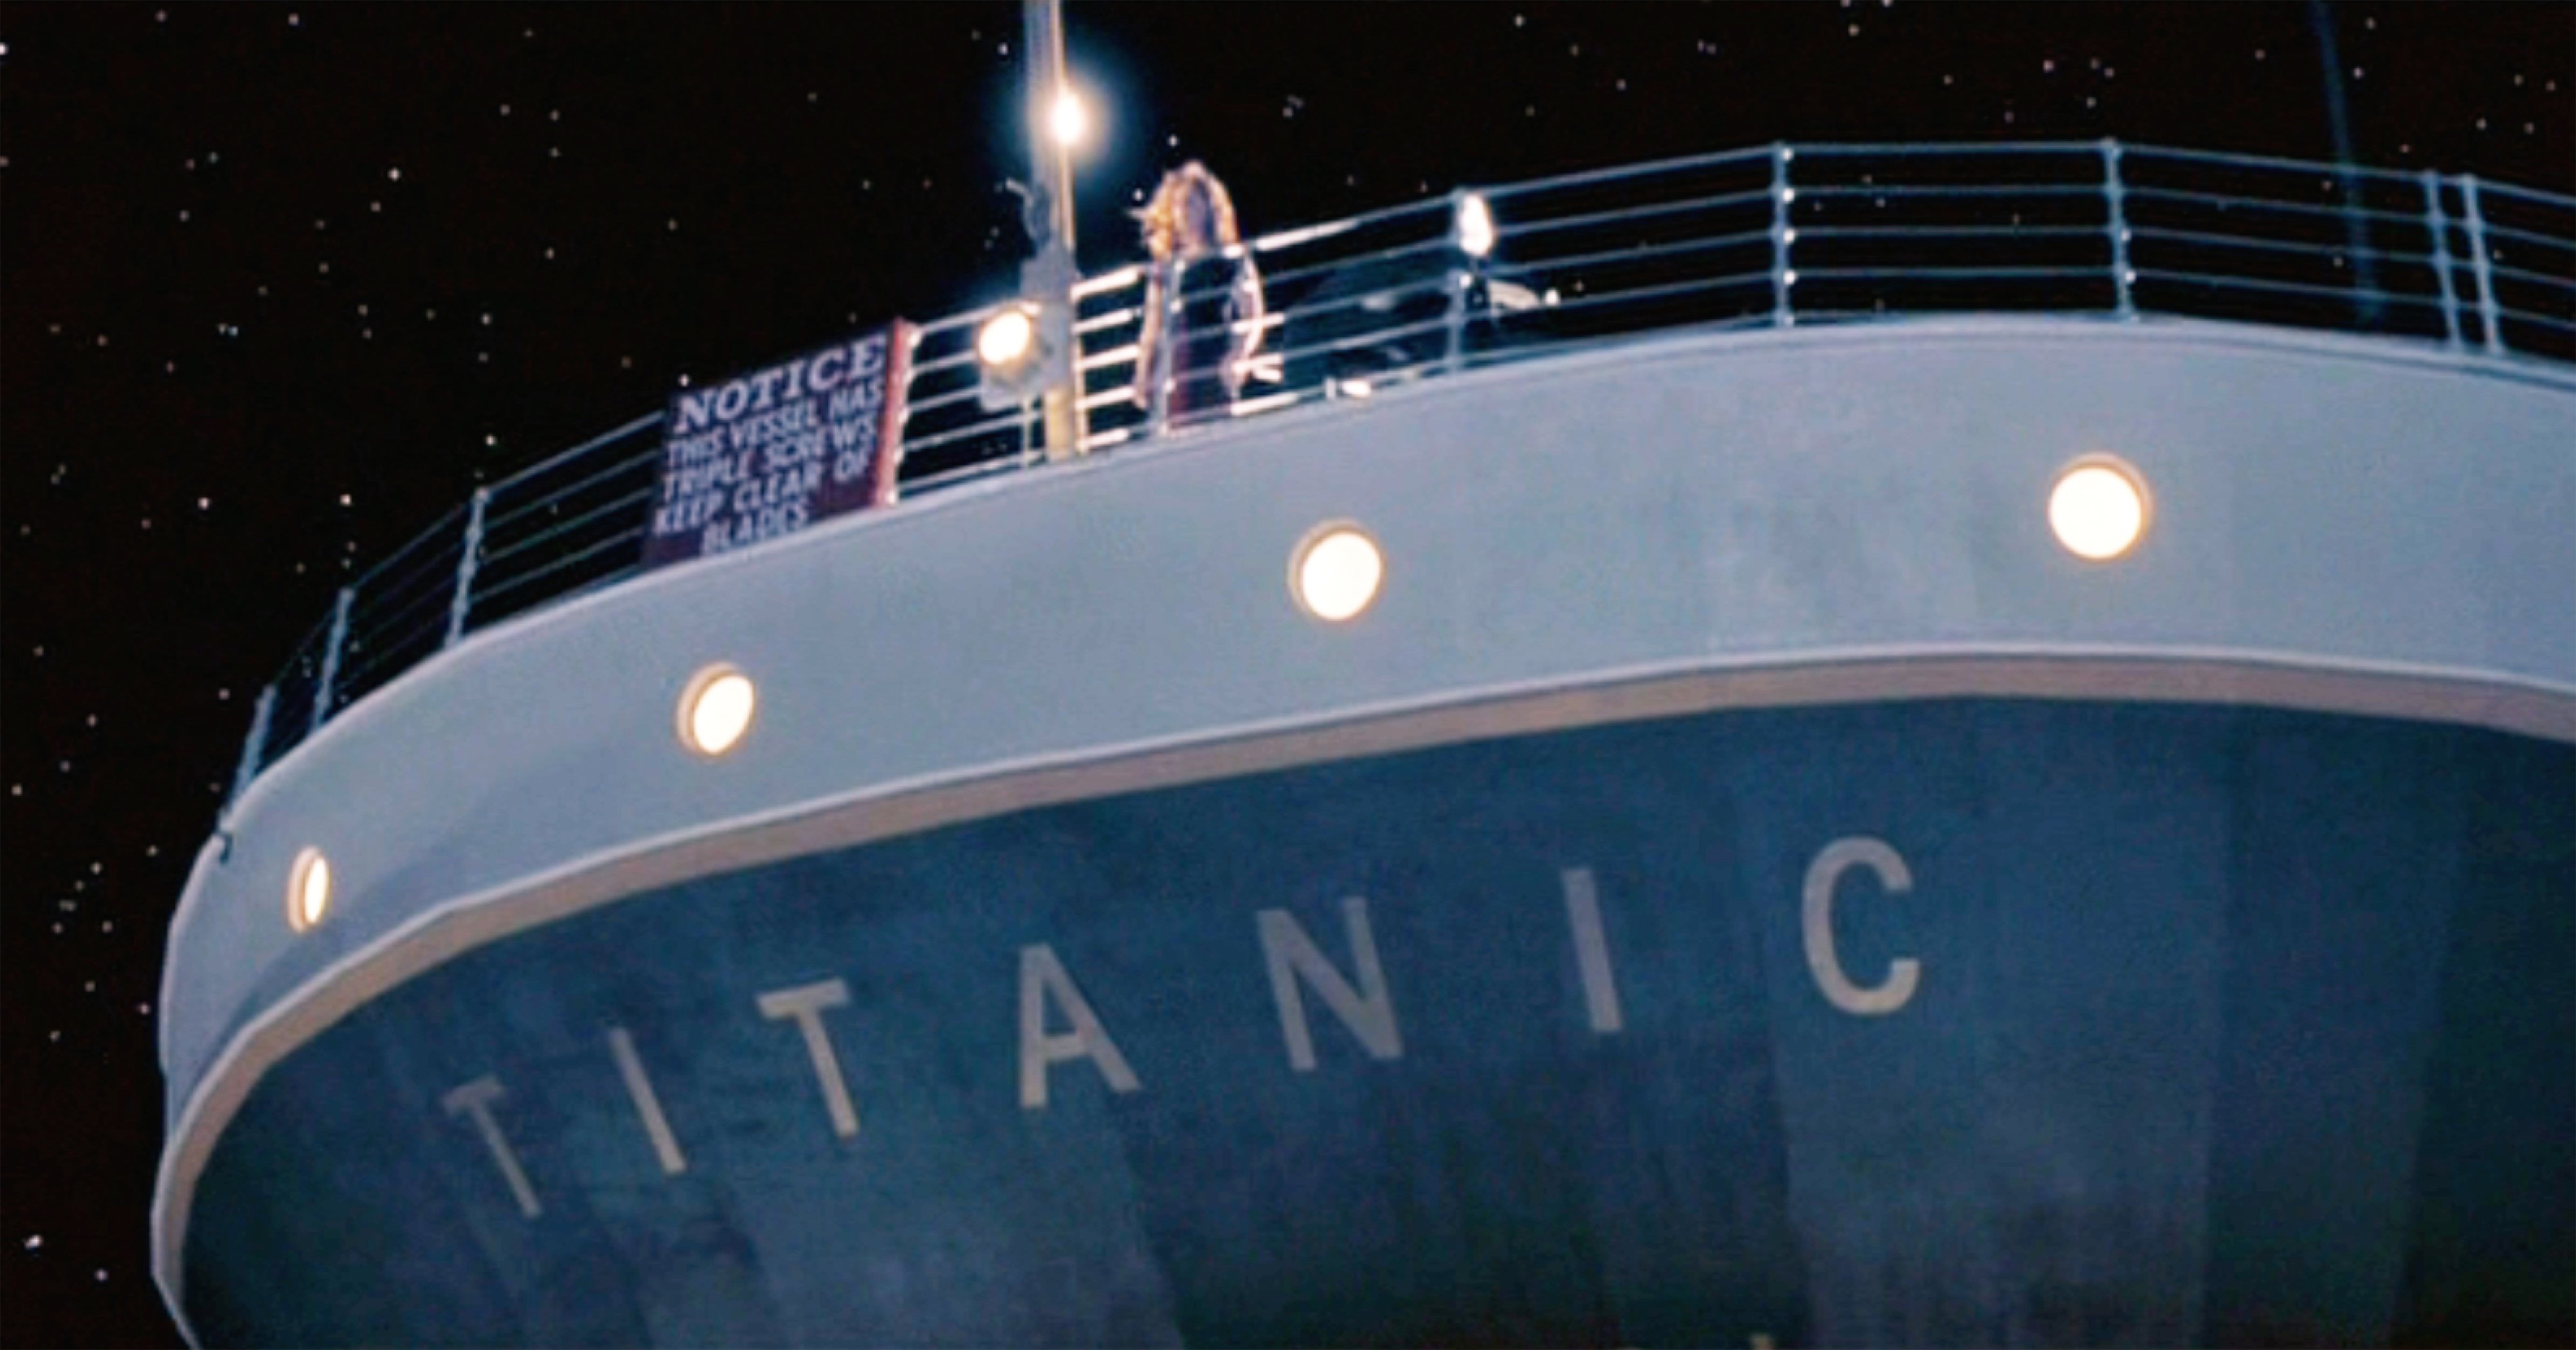 Titanic stern with Kate Winslet on deck